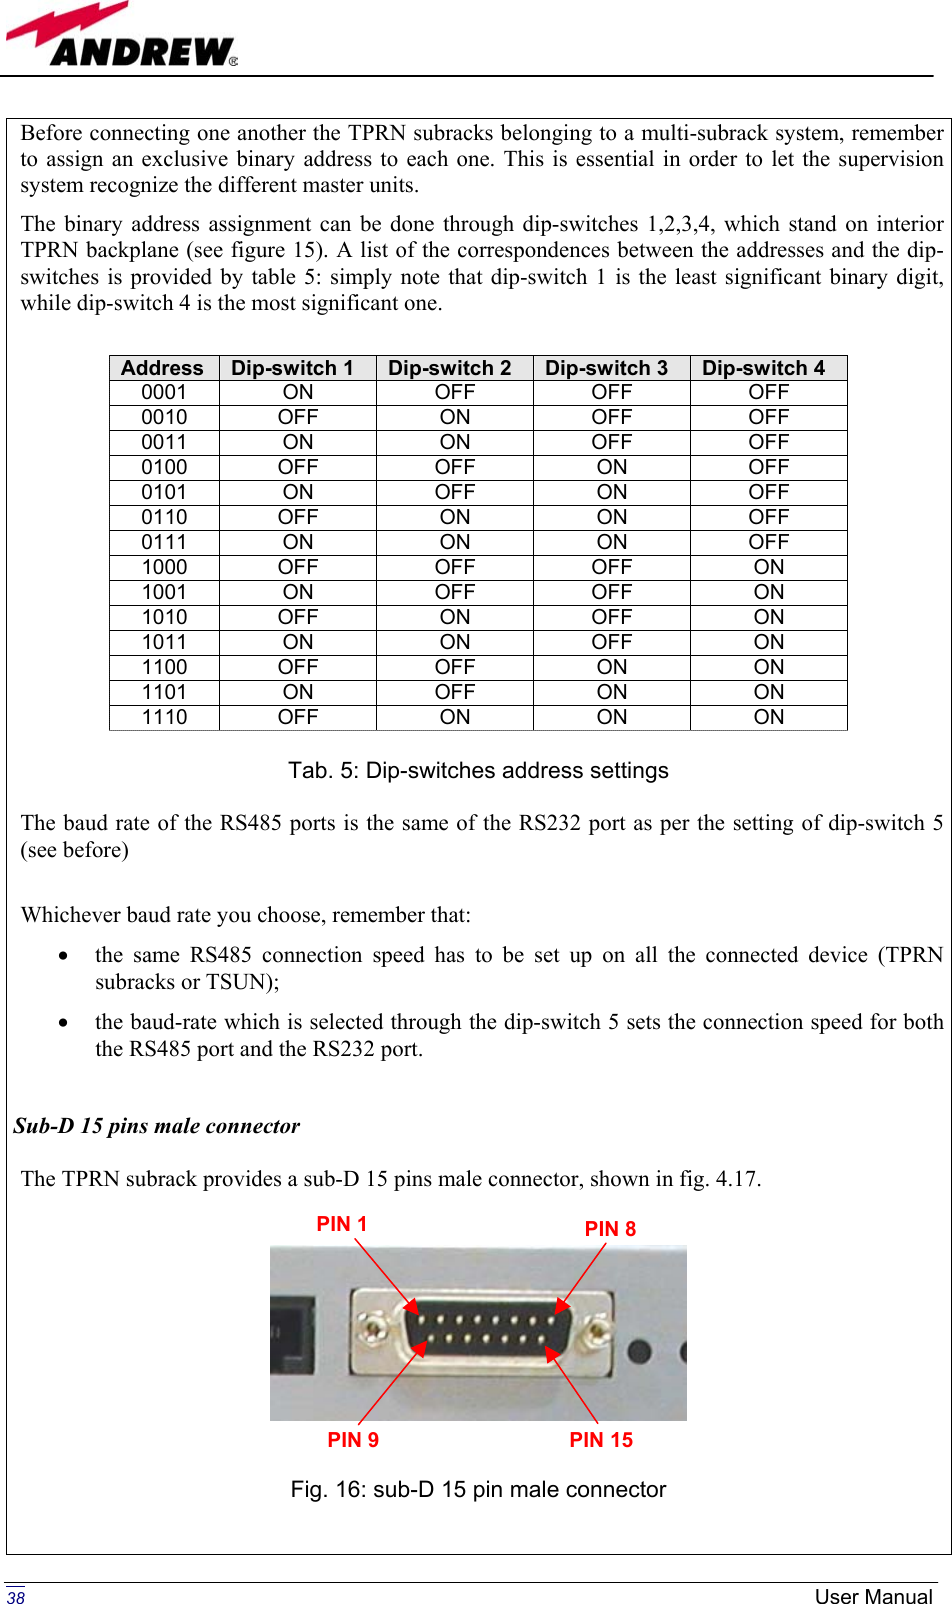 Page 13 of Andrew Wireless Innovations Group BCP-TFAM26 Model TFAM26 Downlink Booster User Manual 